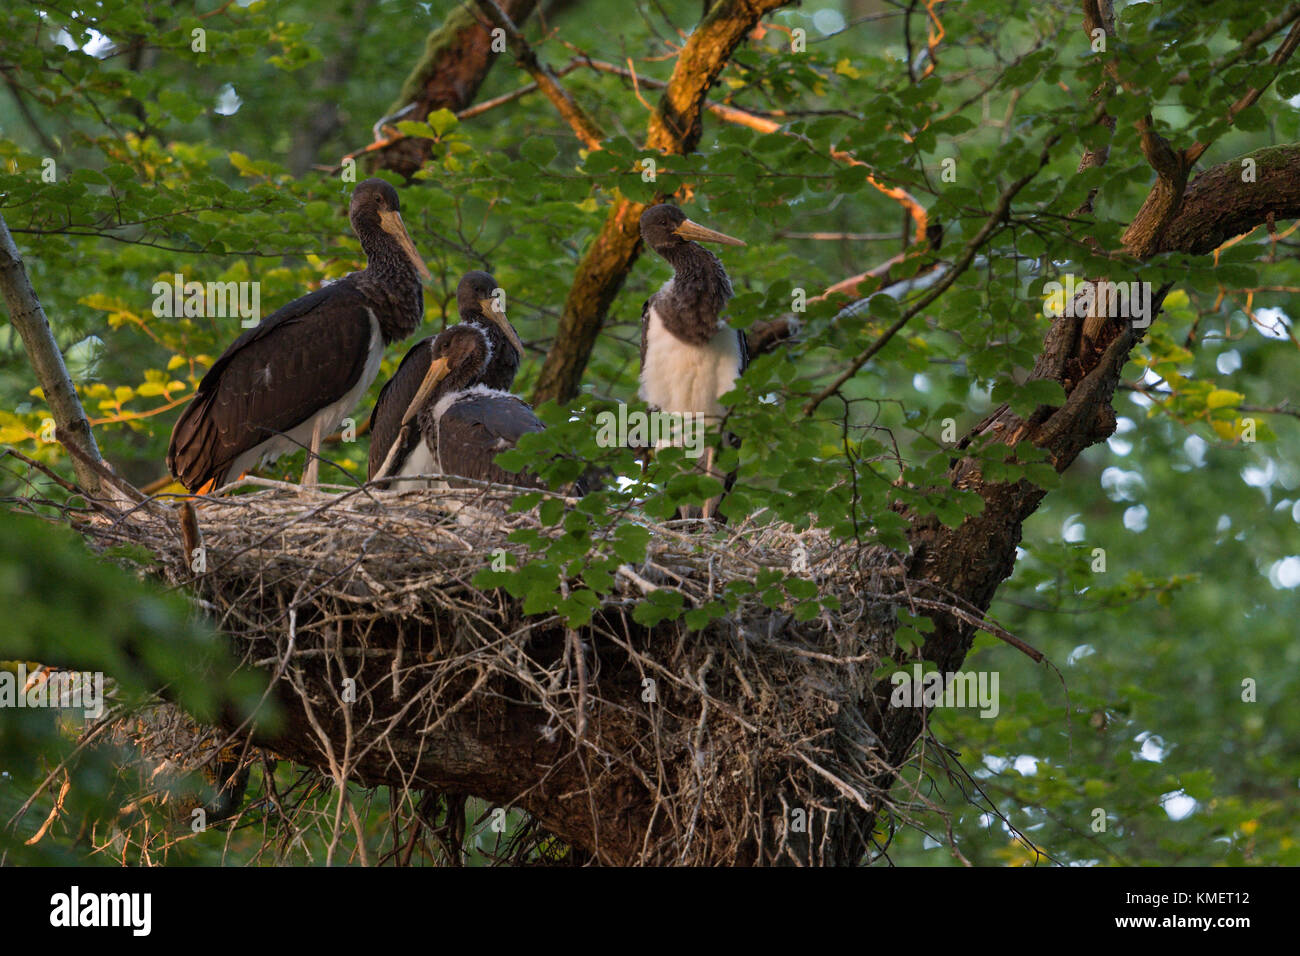 Black Stork / Storks ( Ciconia nigra ), young chicks, sitting in their huge nest, hidden in a treetop of a beech, almost fledged, wildlife, Europe. Stock Photo